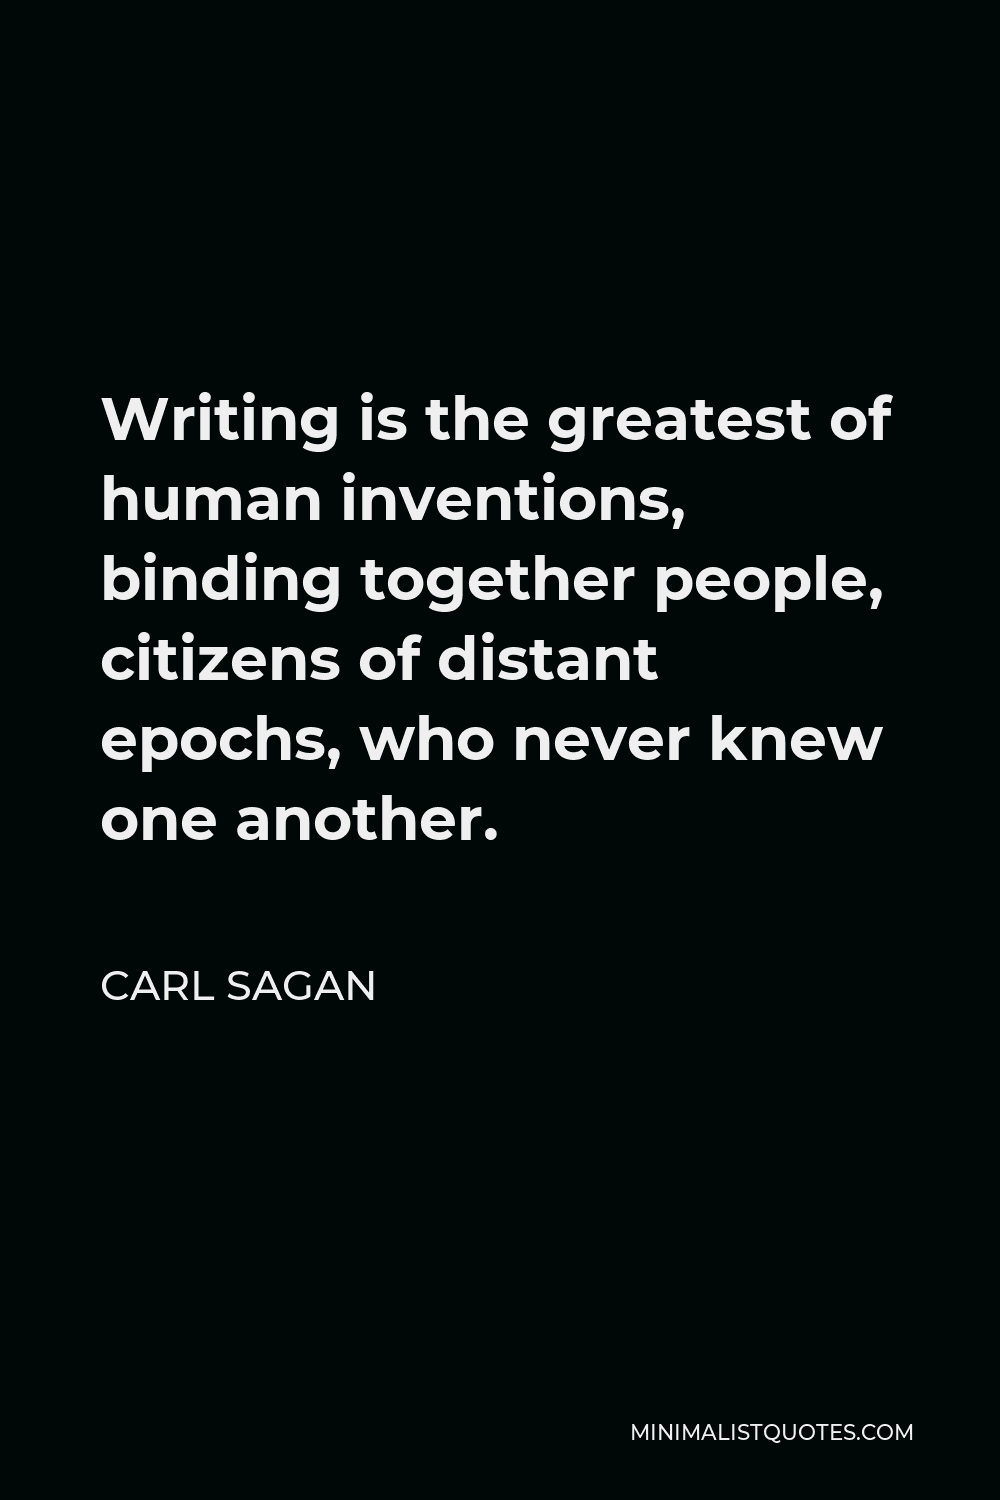 Carl Sagan Quote - Writing is the greatest of human inventions, binding together people, citizens of distant epochs, who never knew one another.